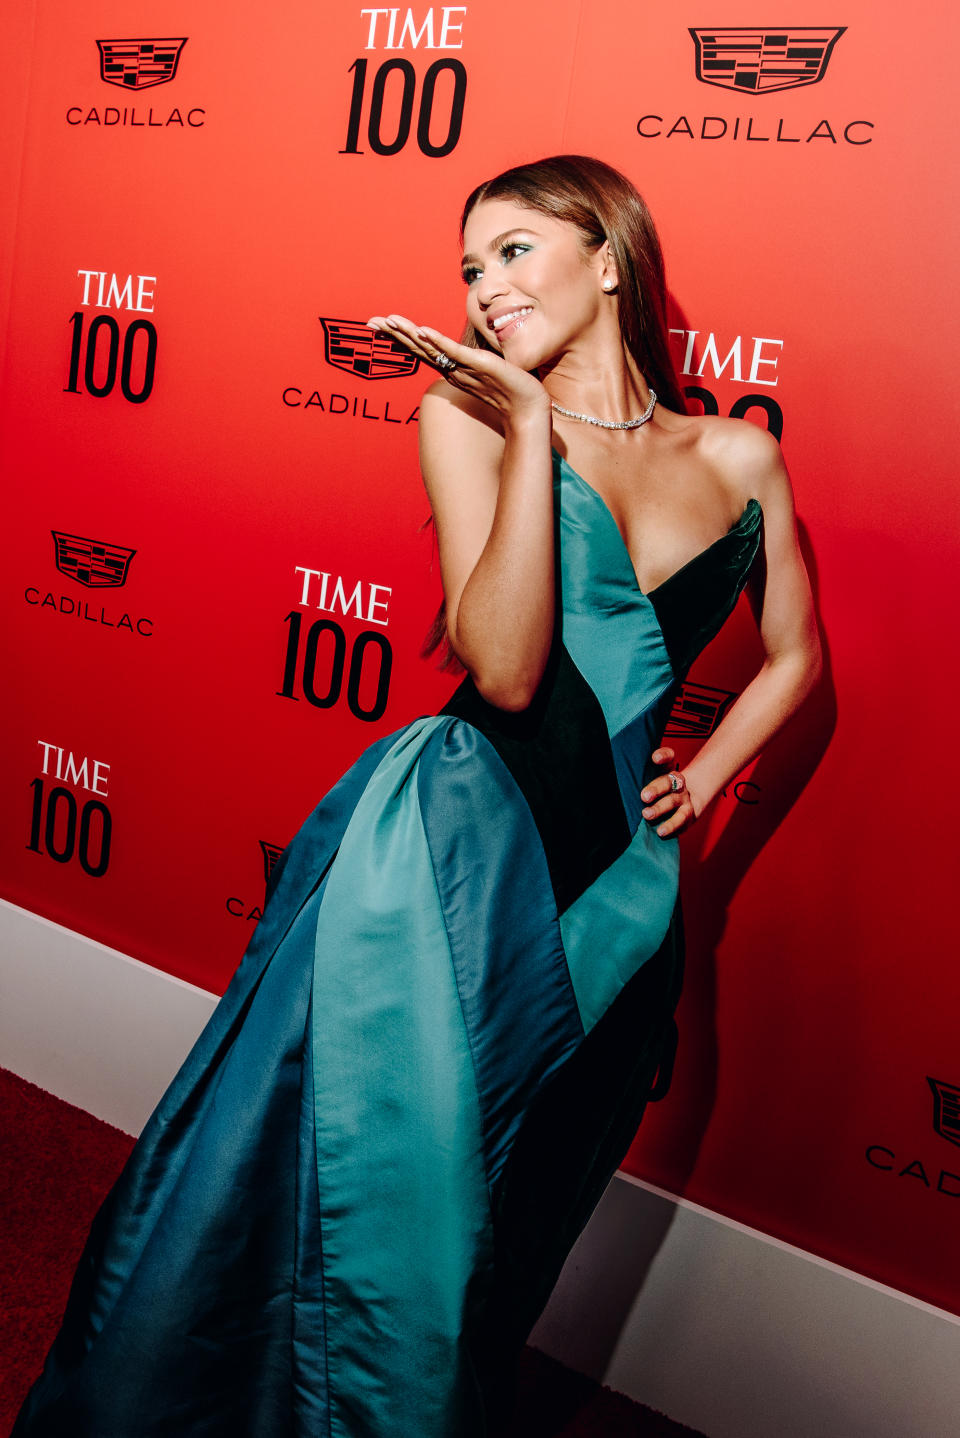 Zendaya at the TIME 100 gala held at Frederick P. Rose Hall at Lincoln Center on June 8, 2022, in New York City. - Credit: Nina Westervelt for Variety